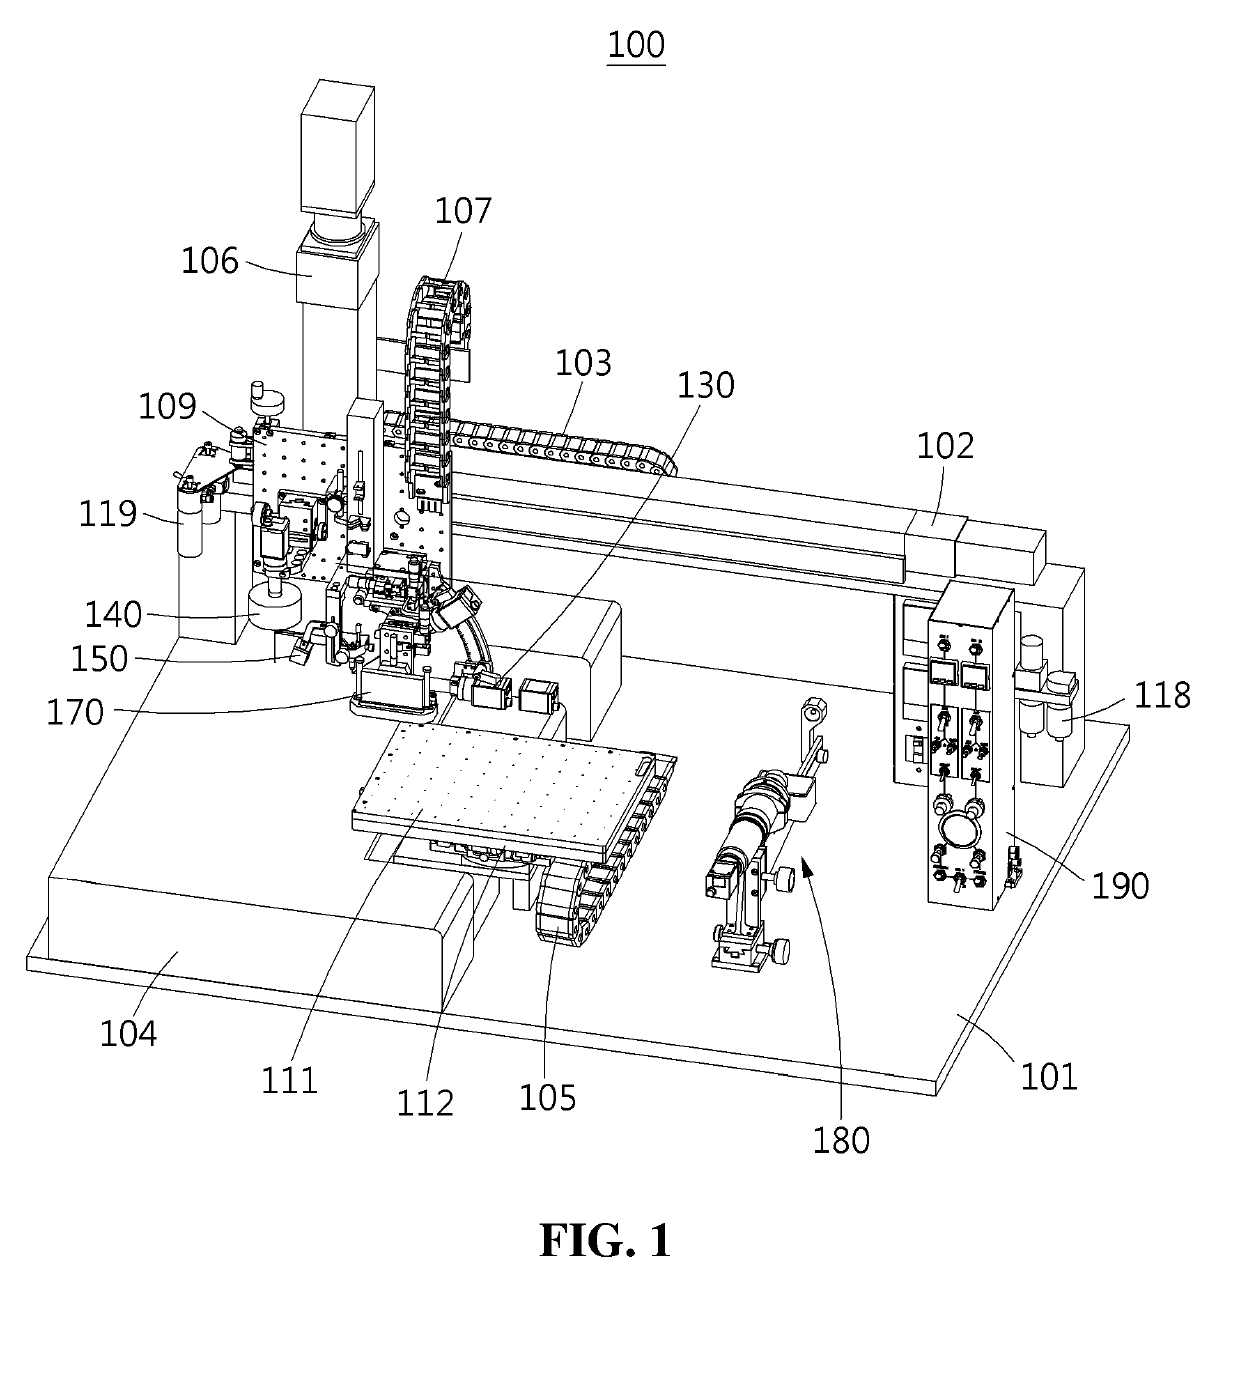 Printing apparatus for printed electronics